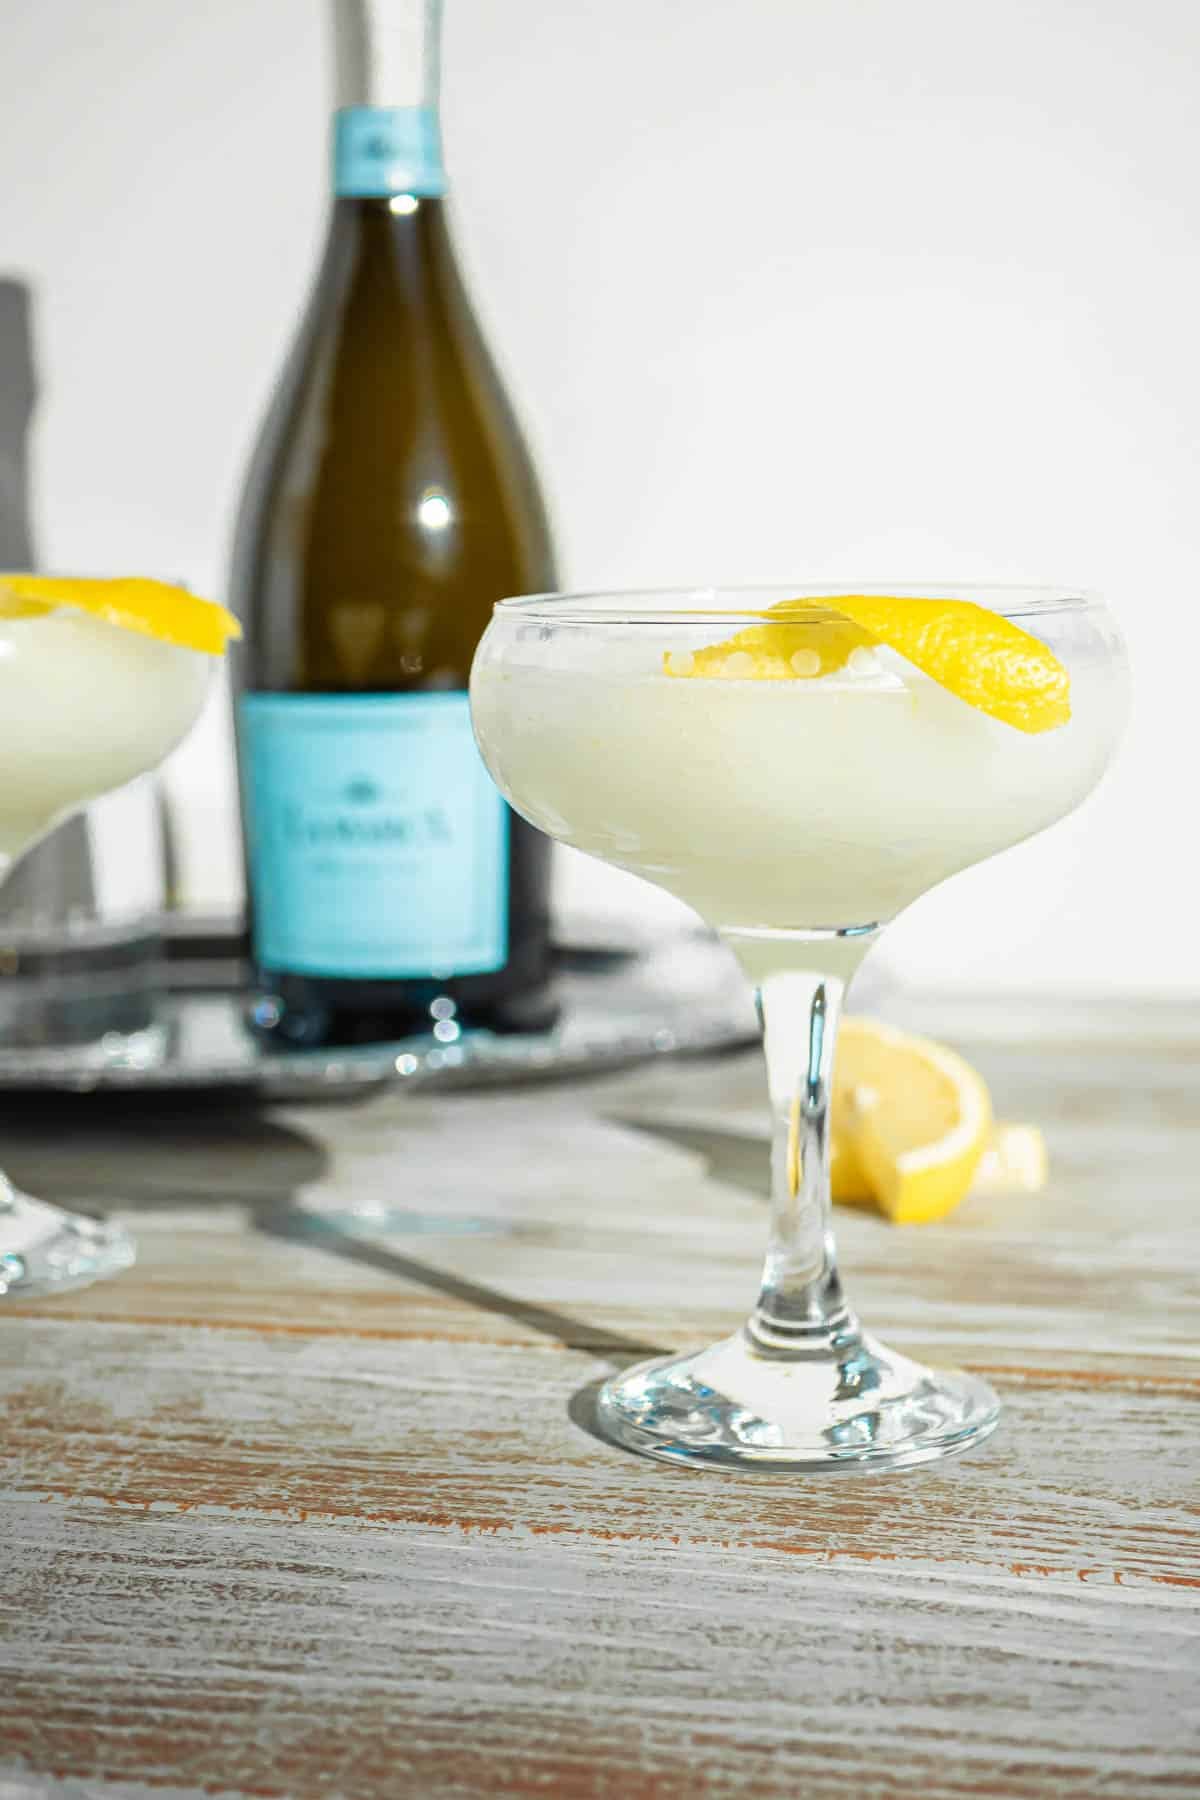 Sgroppino Prosecco cocktail with lemon zest in front of a tray with bottles of Prosecco.